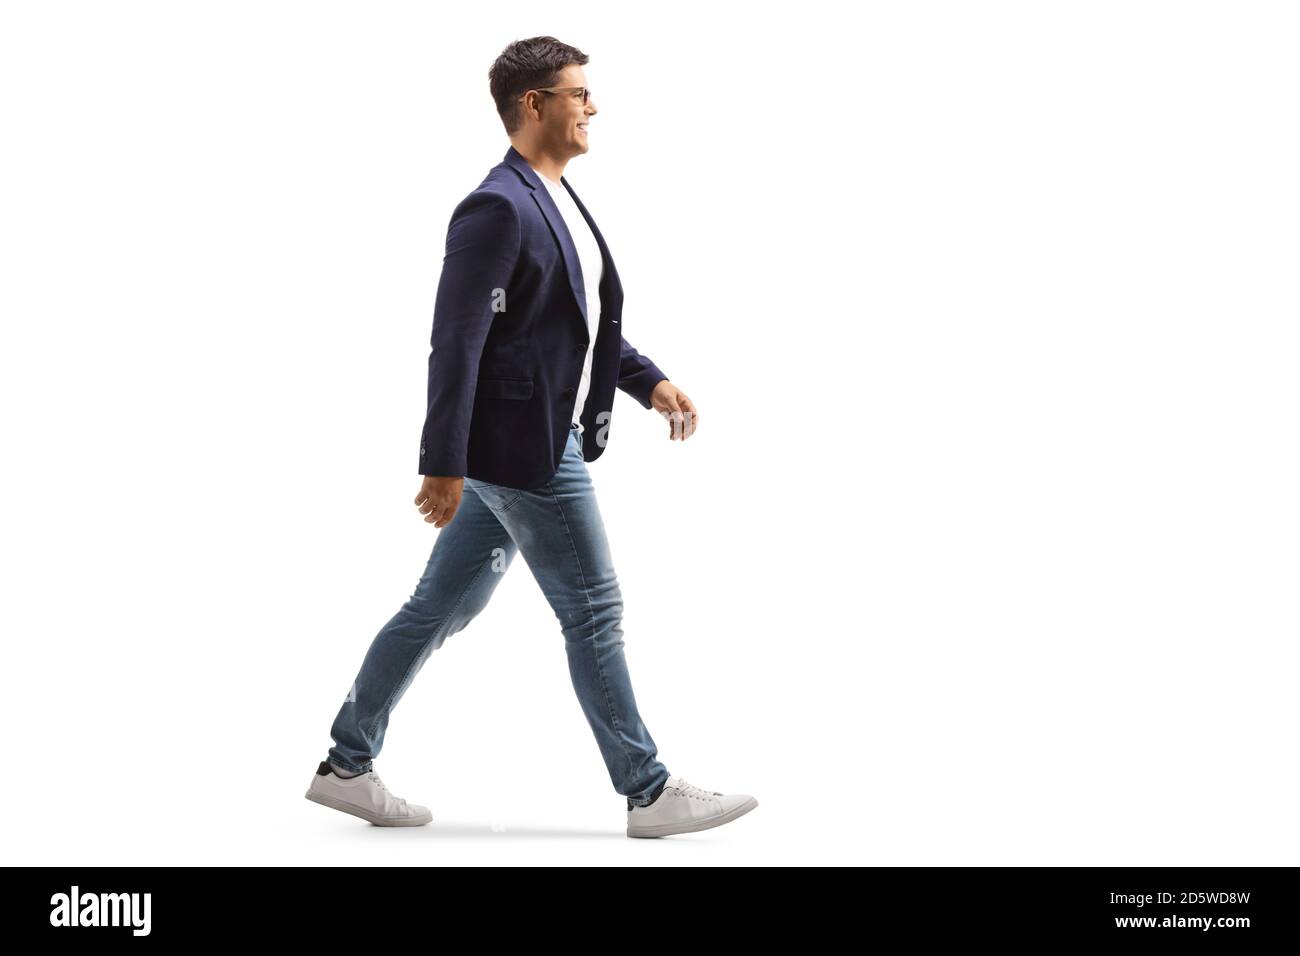 Full length profile shot of a smiling young man in jeans and suit walking isolated on white background Stock Photo